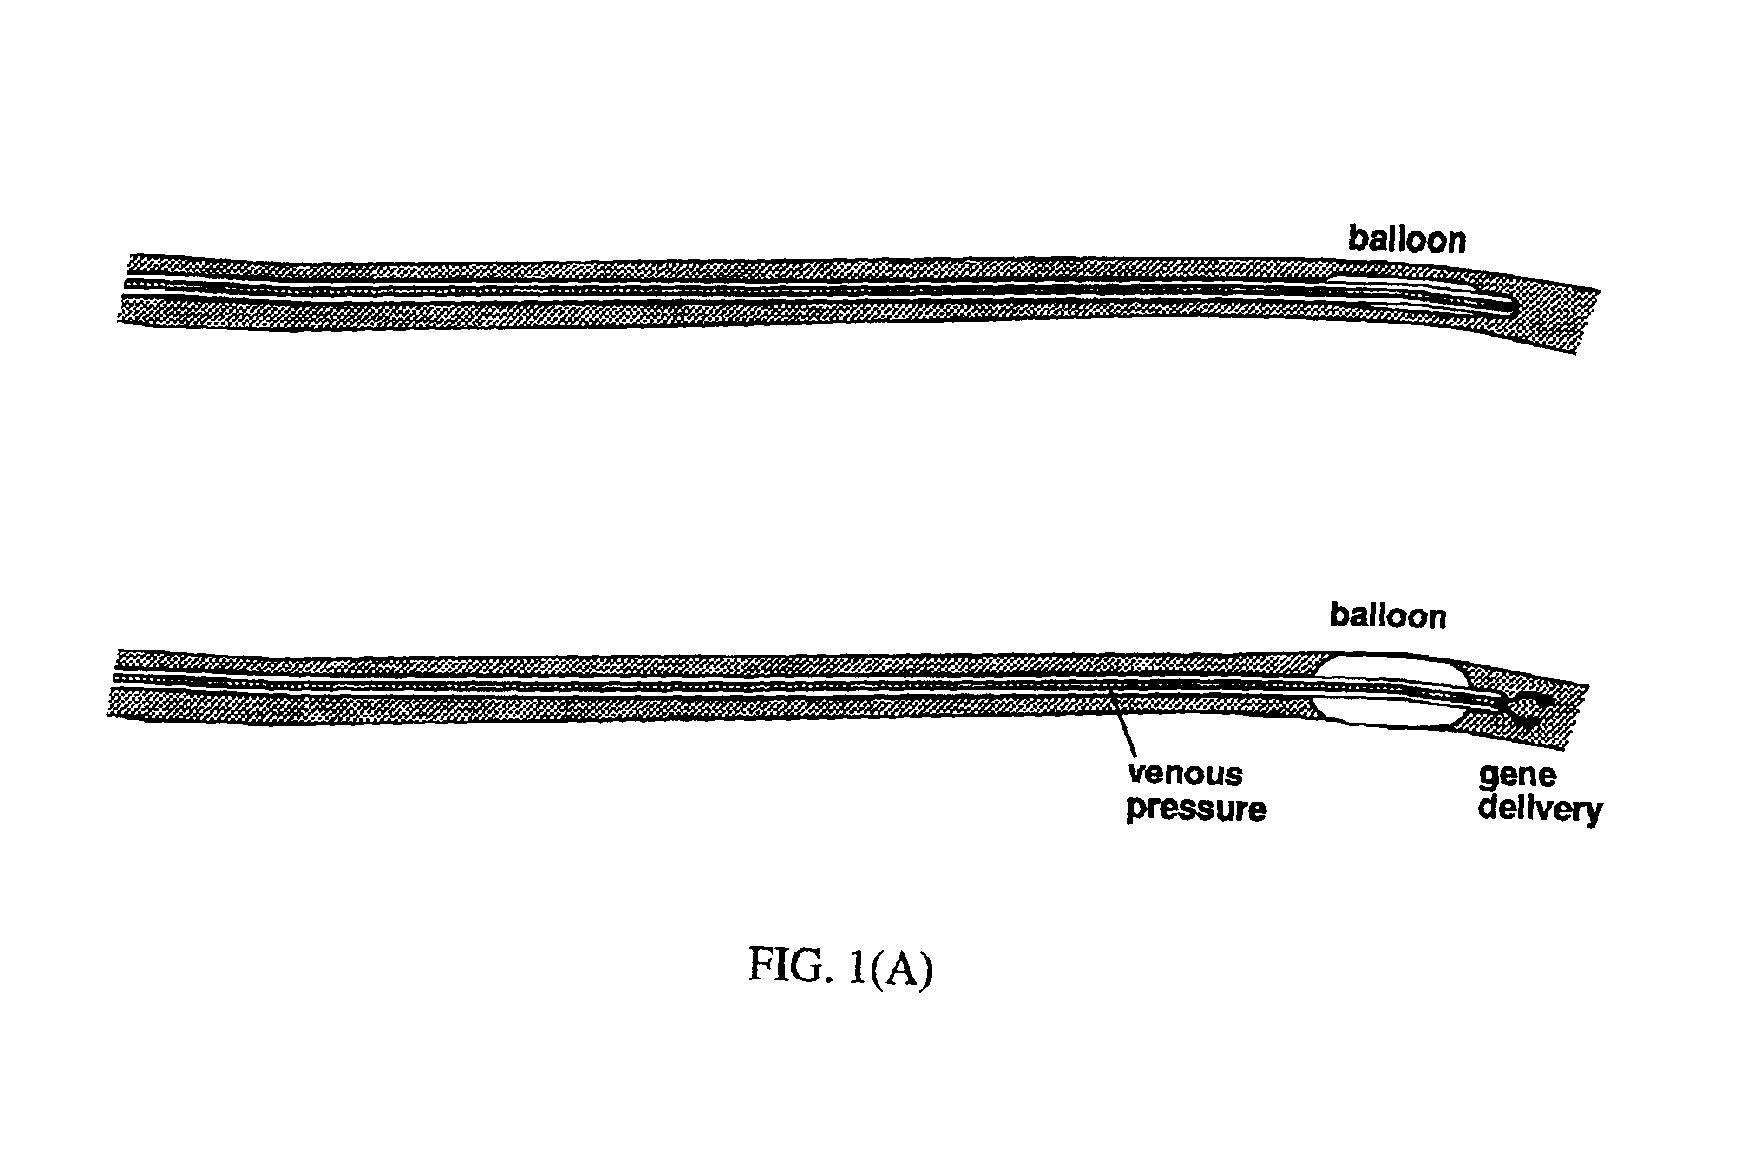 Process for delivering nucleic acids to cardiac tissue